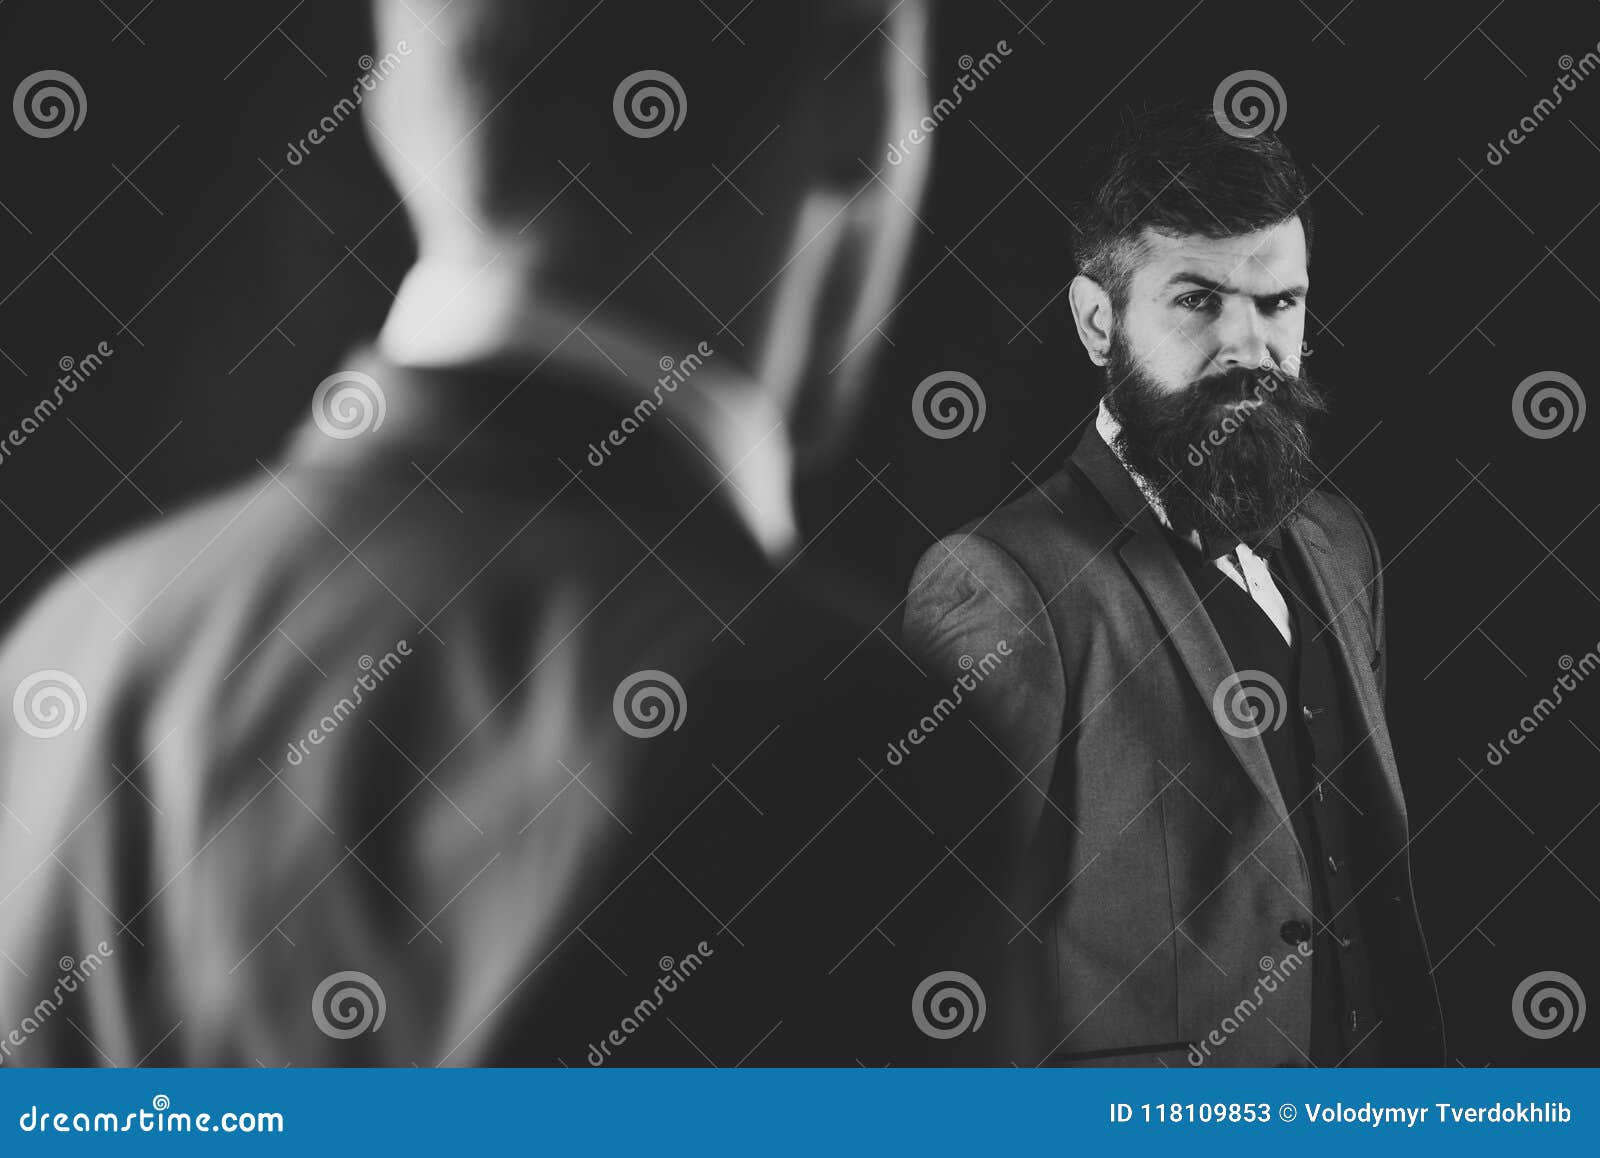 meeting of reputable businessmen, black background. man with beard on suspicious face, and shoulders of partner